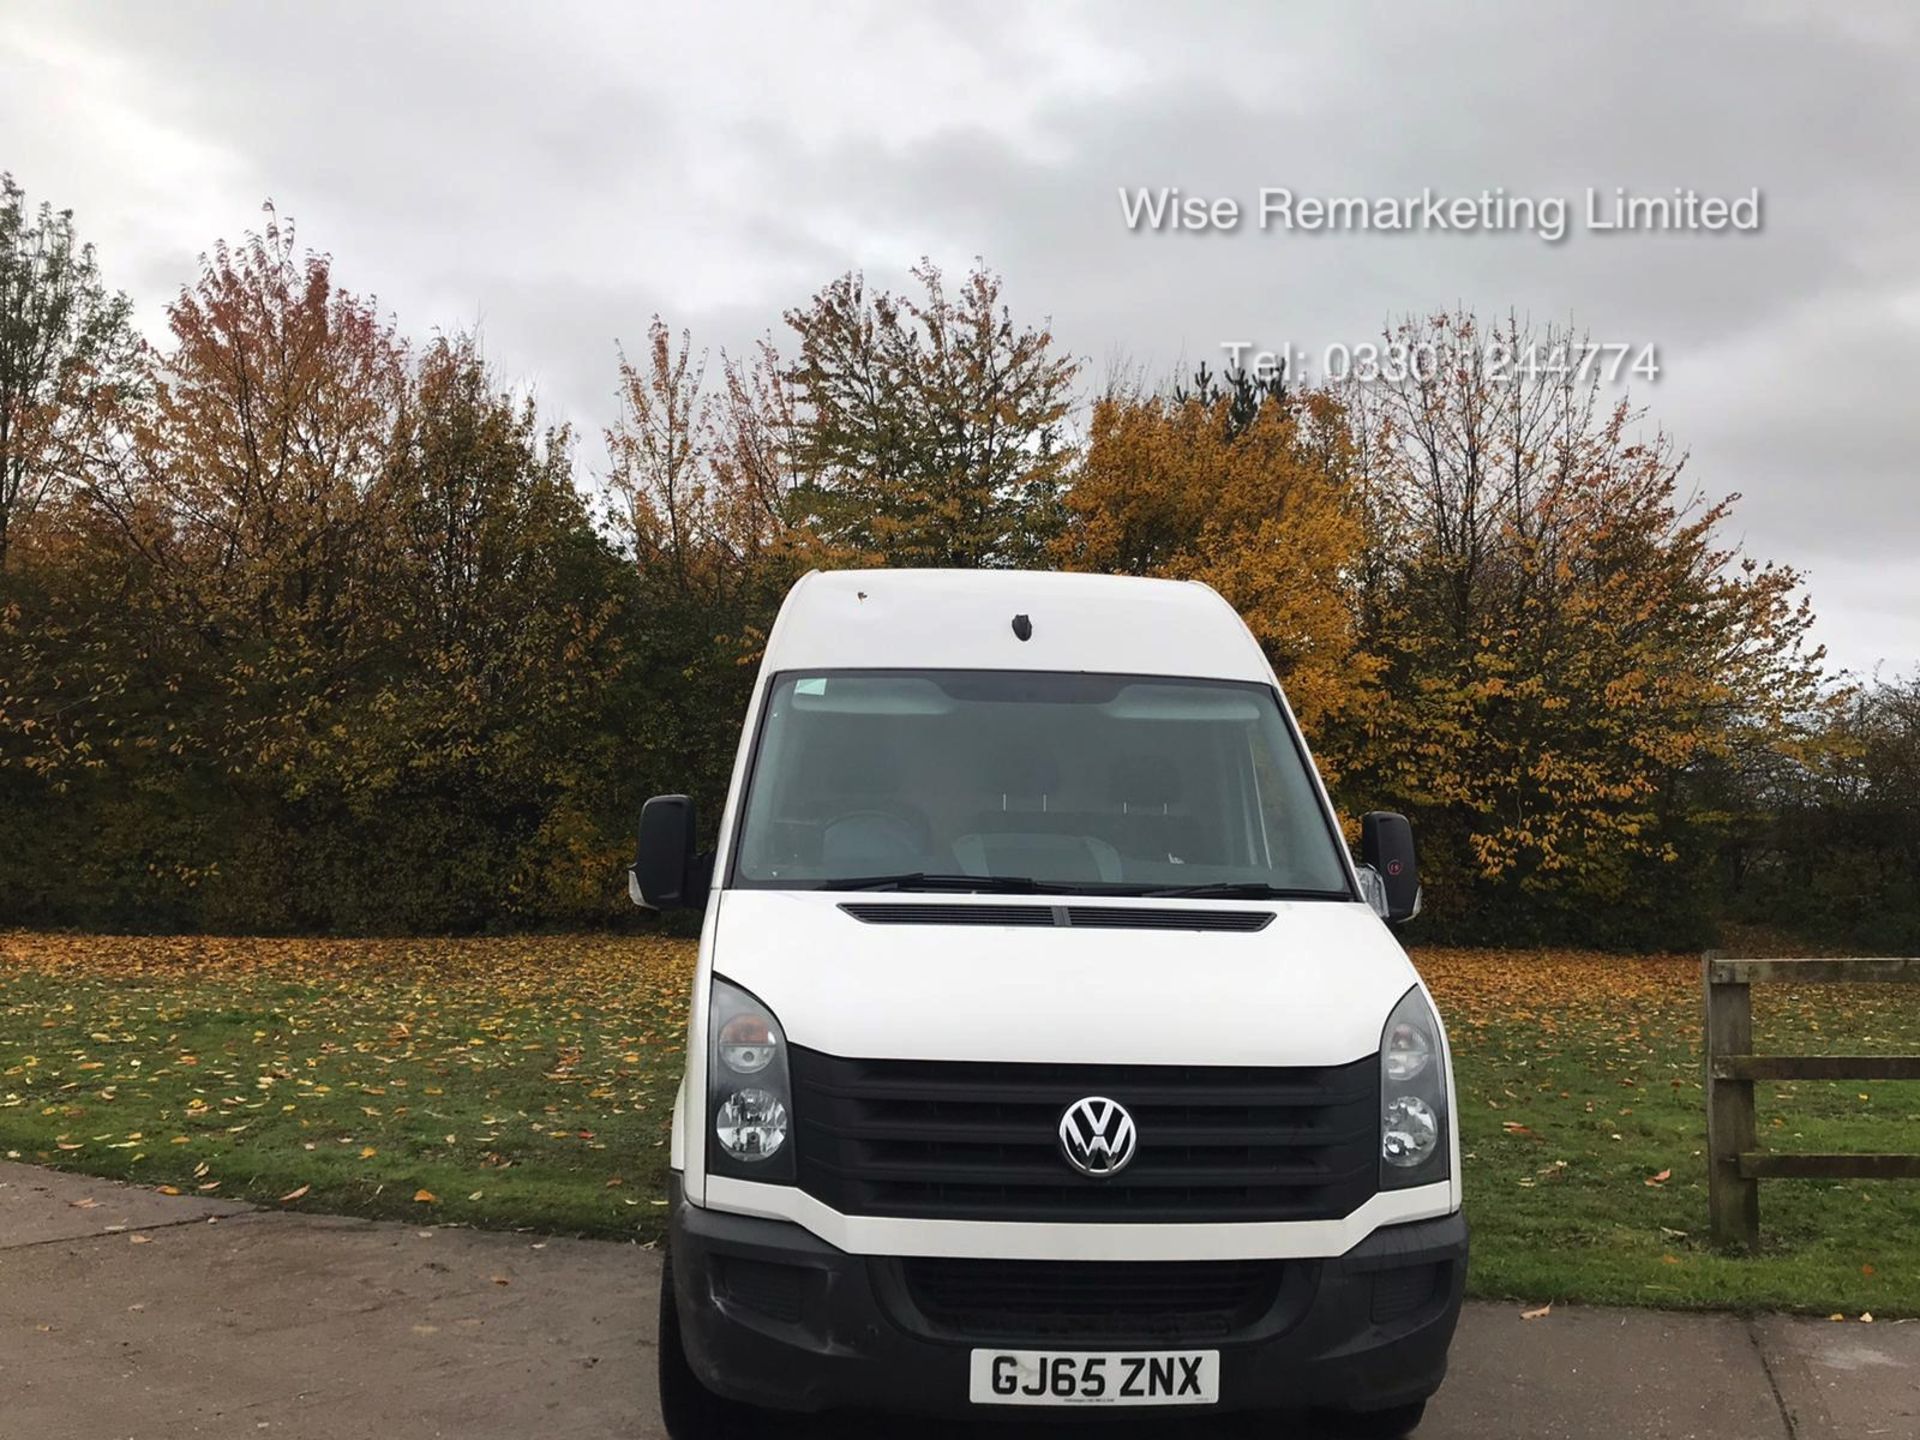 Volkswagen Crafter CR35 Startline 2.0l TDi - LWB - 2016 Model - 1 Keeper From New - Service History - Image 3 of 15